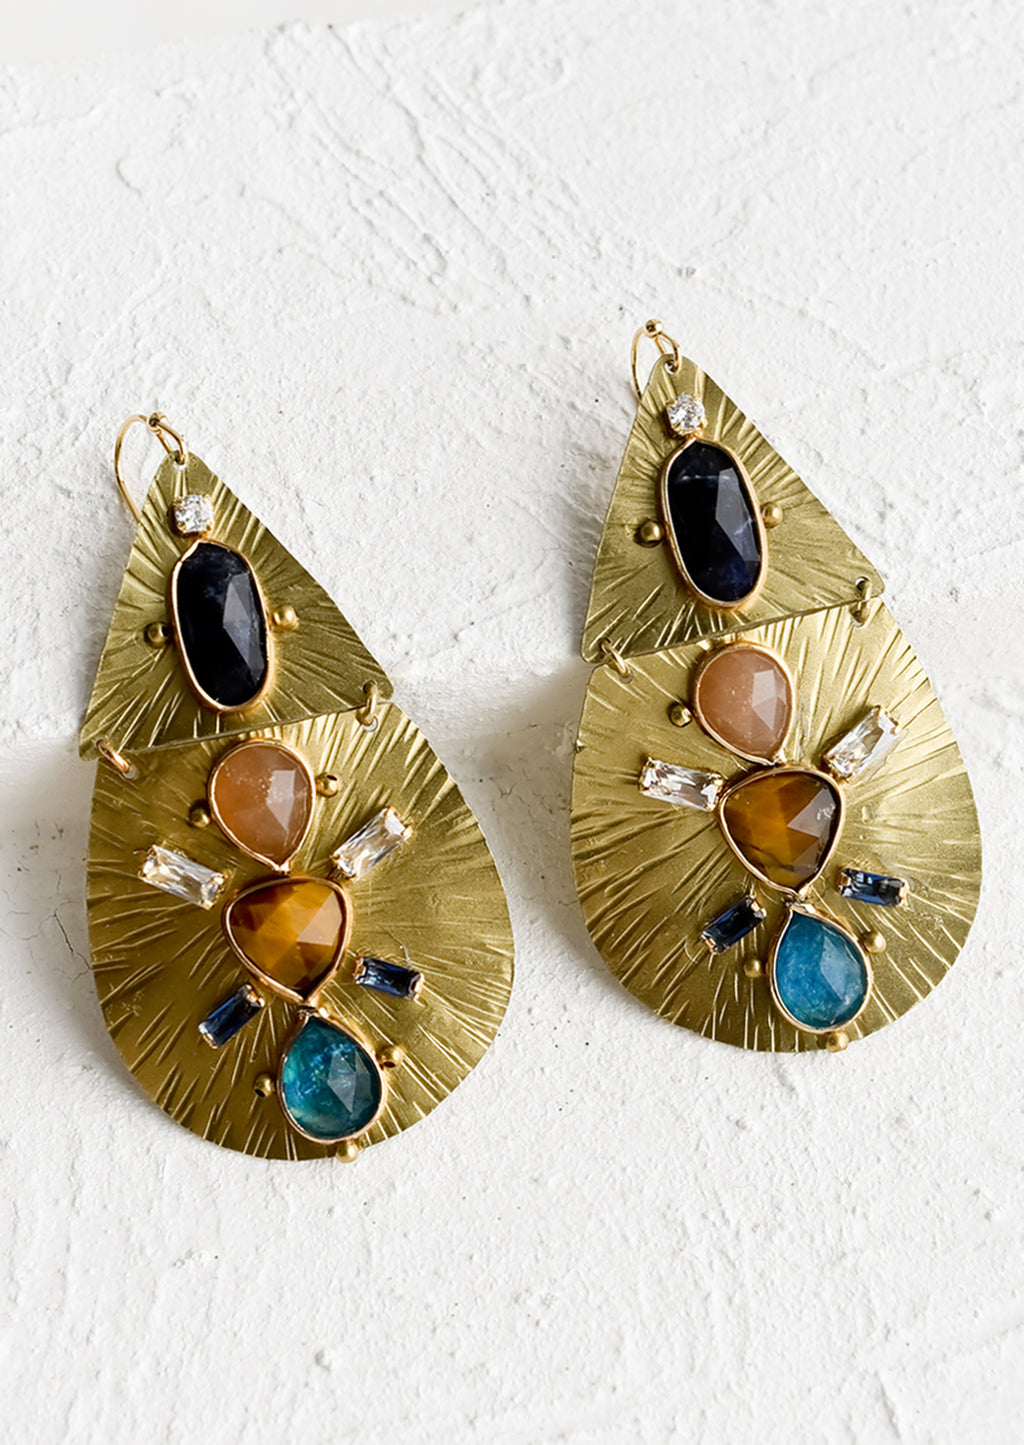 1: A pair of teardrop shaped gold metal earrings with crystal and gemstone embellishment.